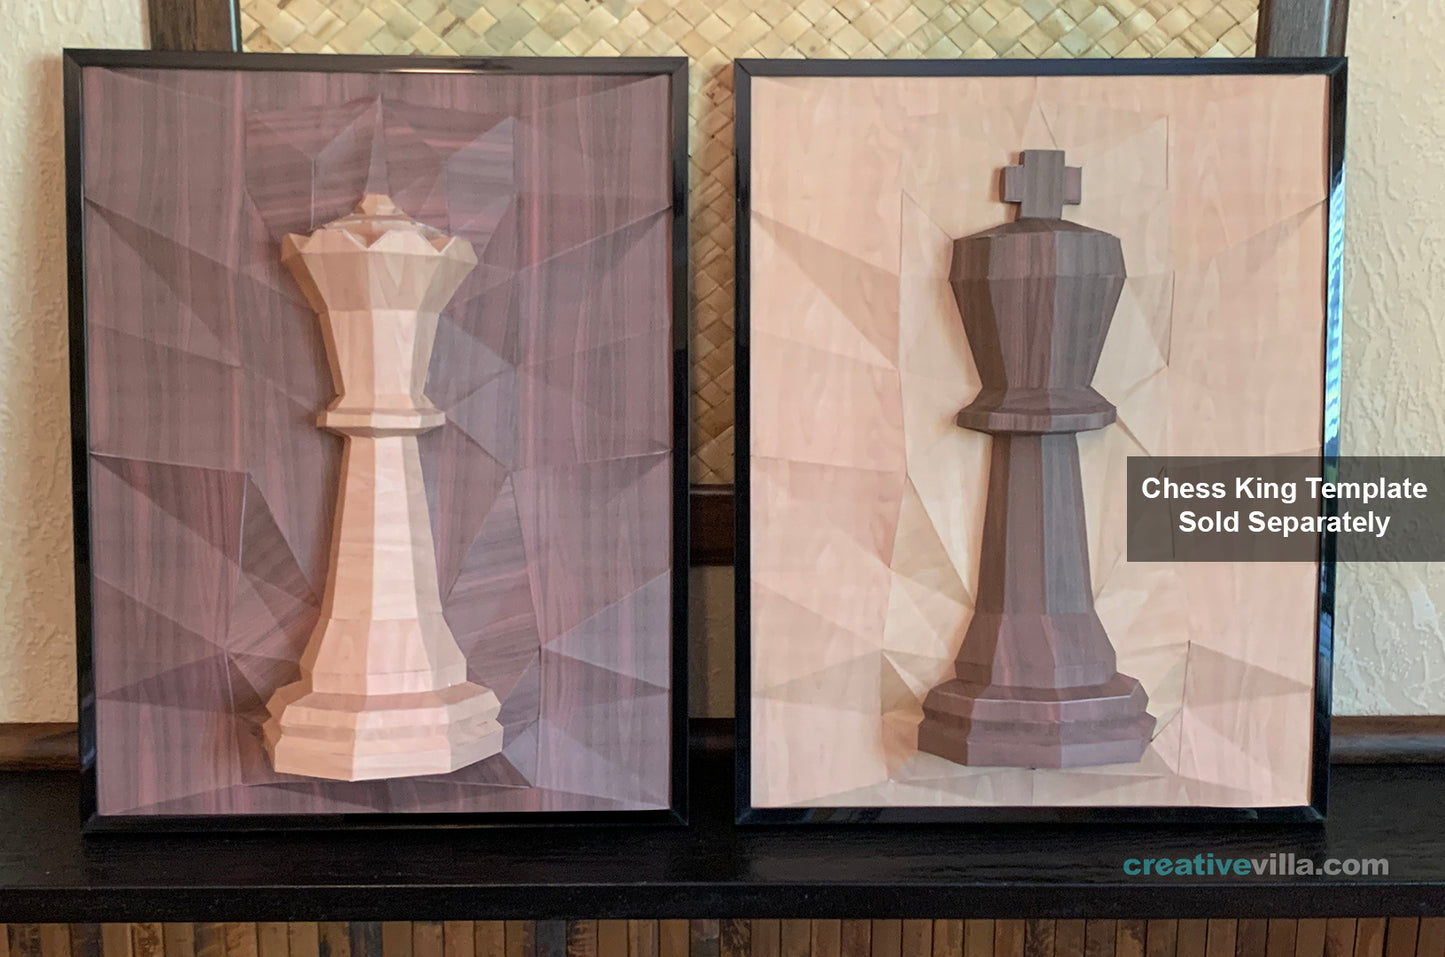 Chess Queen 3D Relief Wall Sculpture DIY Low Poly Paper Model Template, Paper Craft